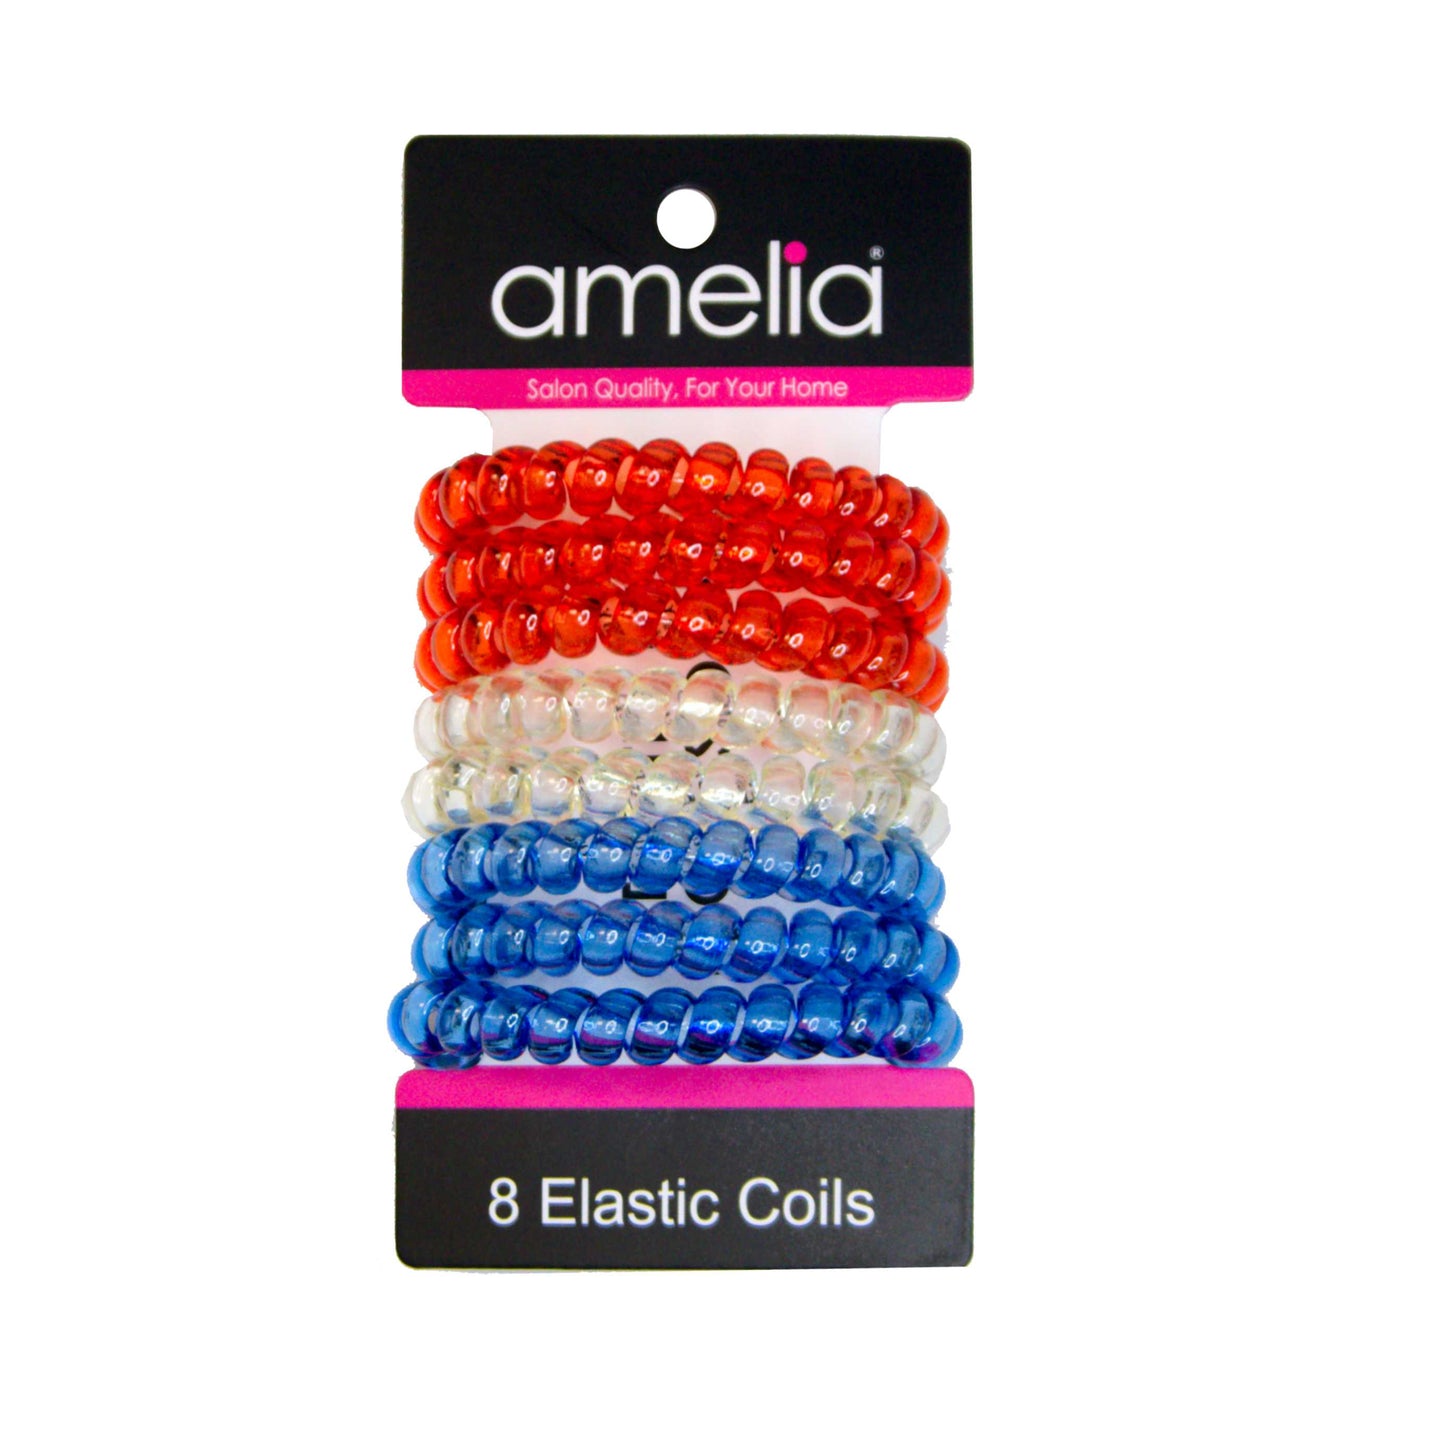 Amelia Beauty Products 8 Large Smooth Elastic Hair Coils, 2. 5in Diameter Thick Spiral Hair Ties, Gentle on Hair, Strong Hold and Minimizes Dents and Creases, Red, Gold and Blue